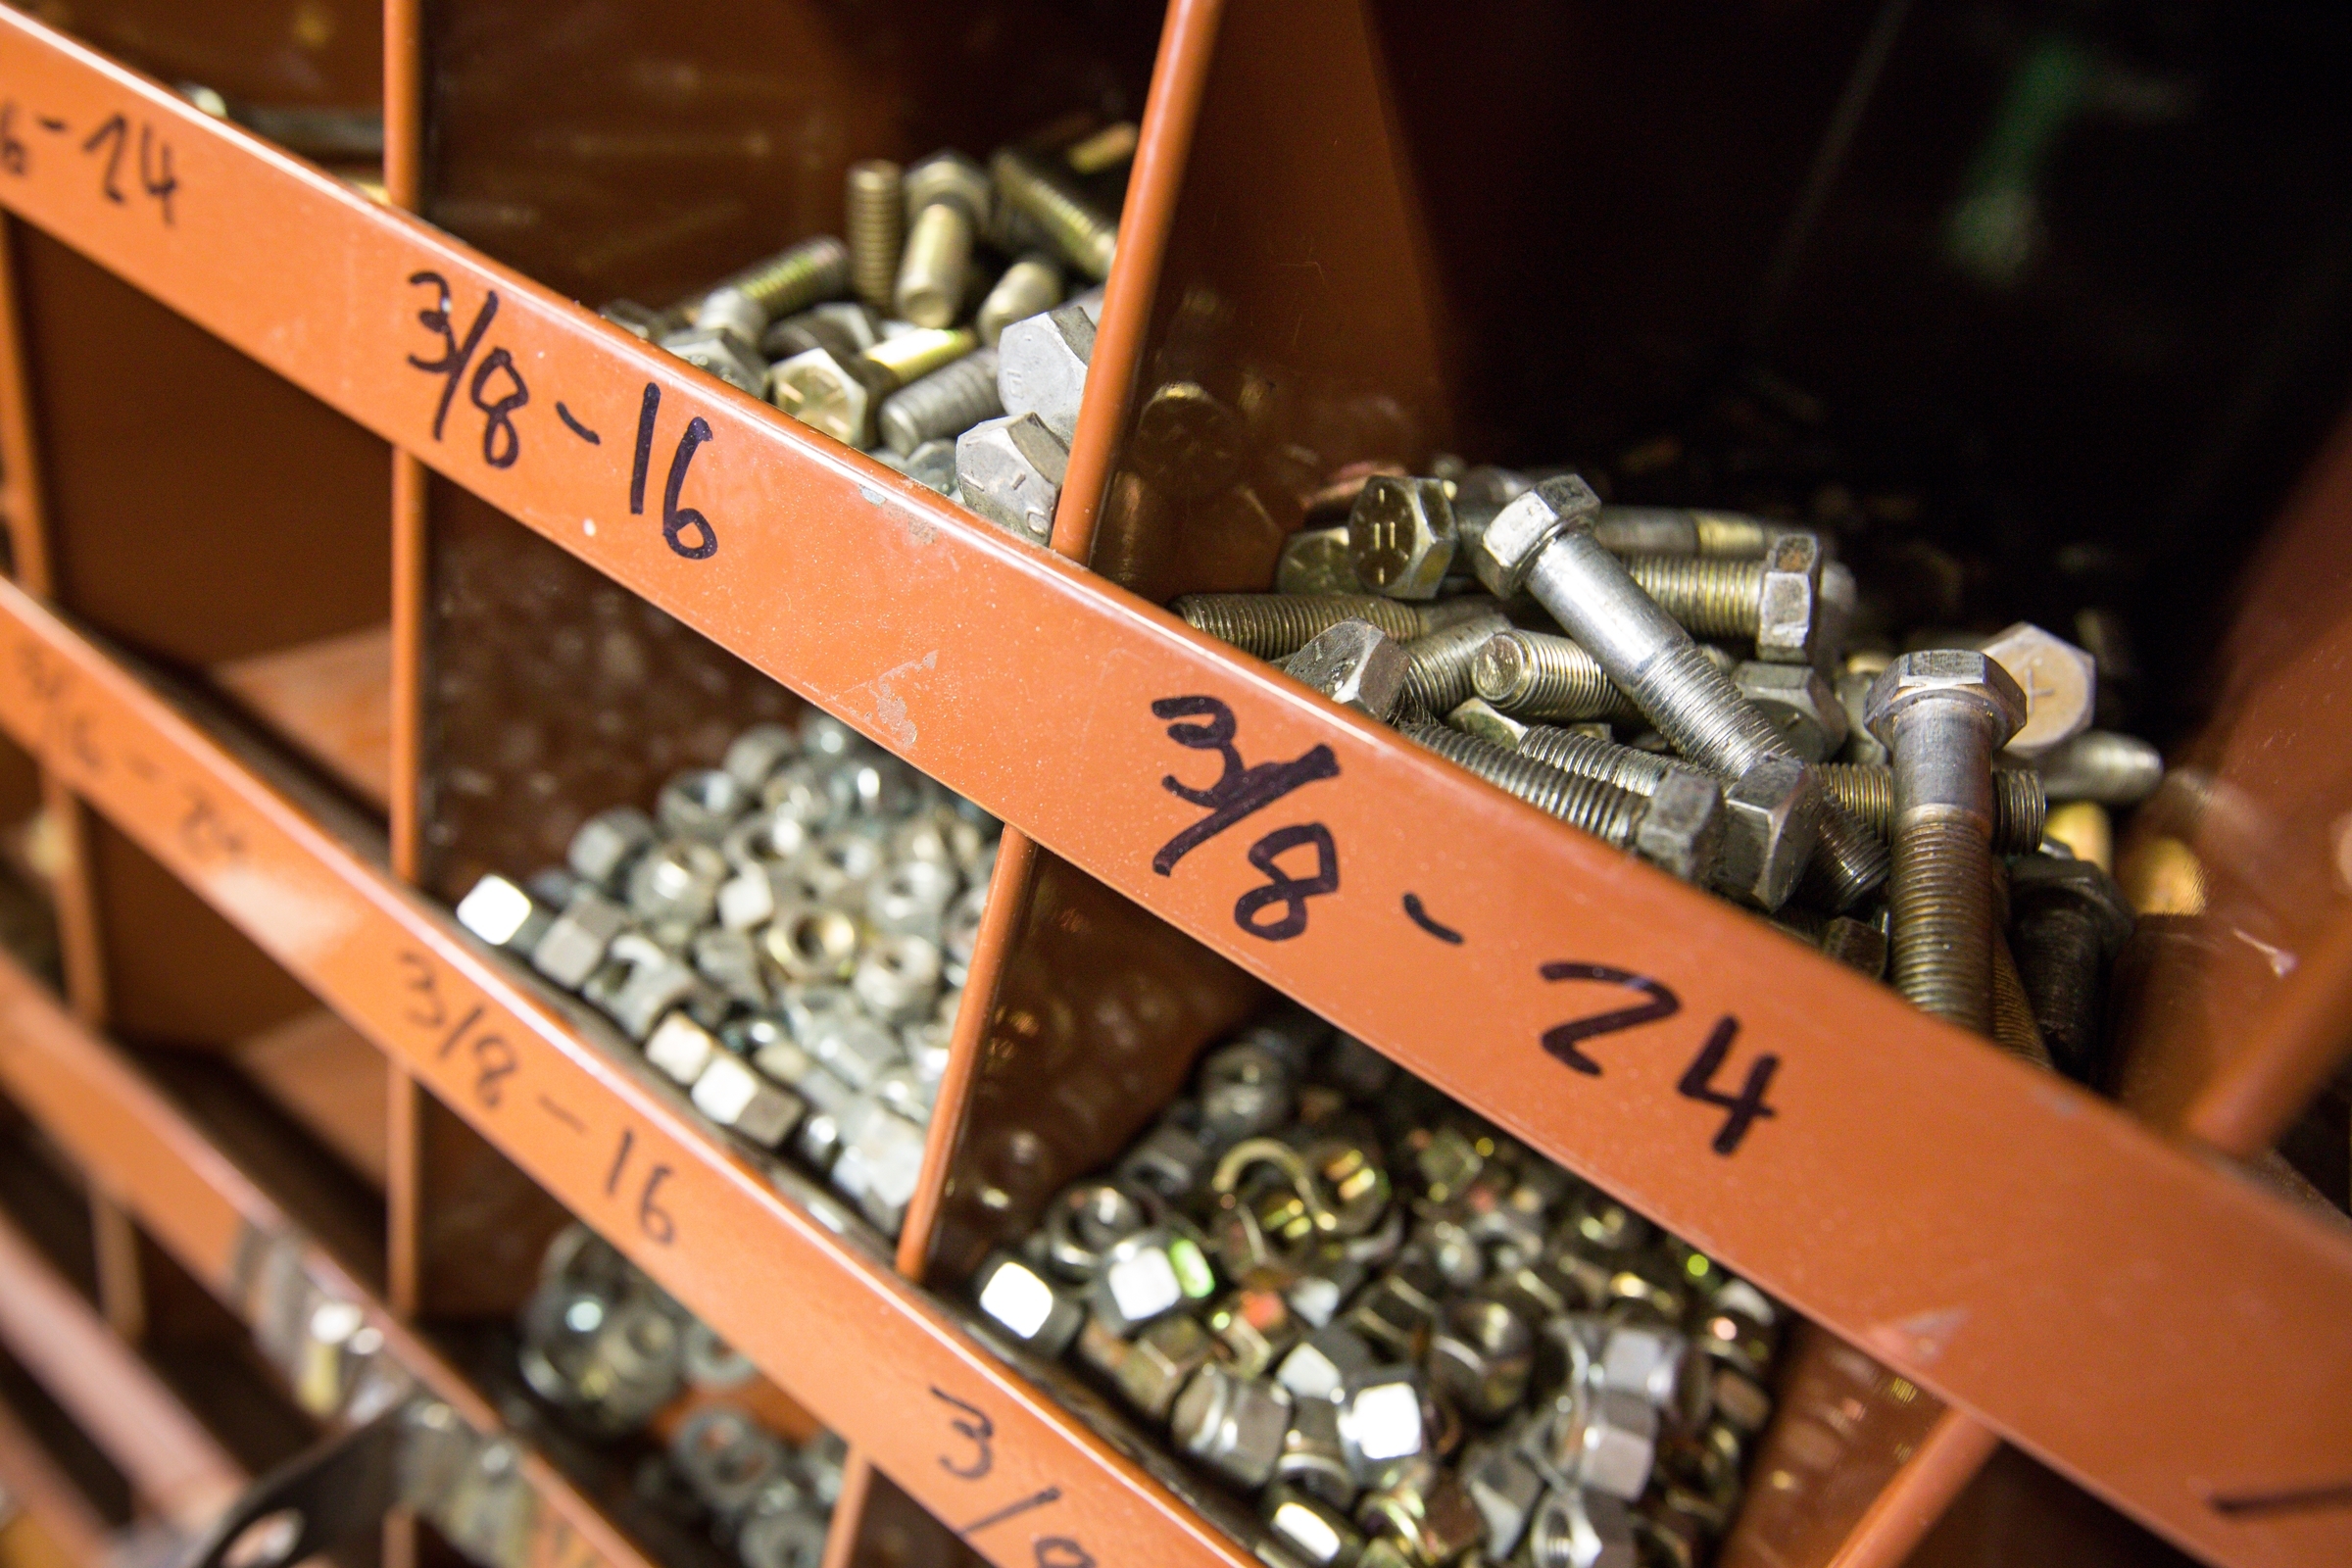 Nuts and bolts in an auto shop on campus.